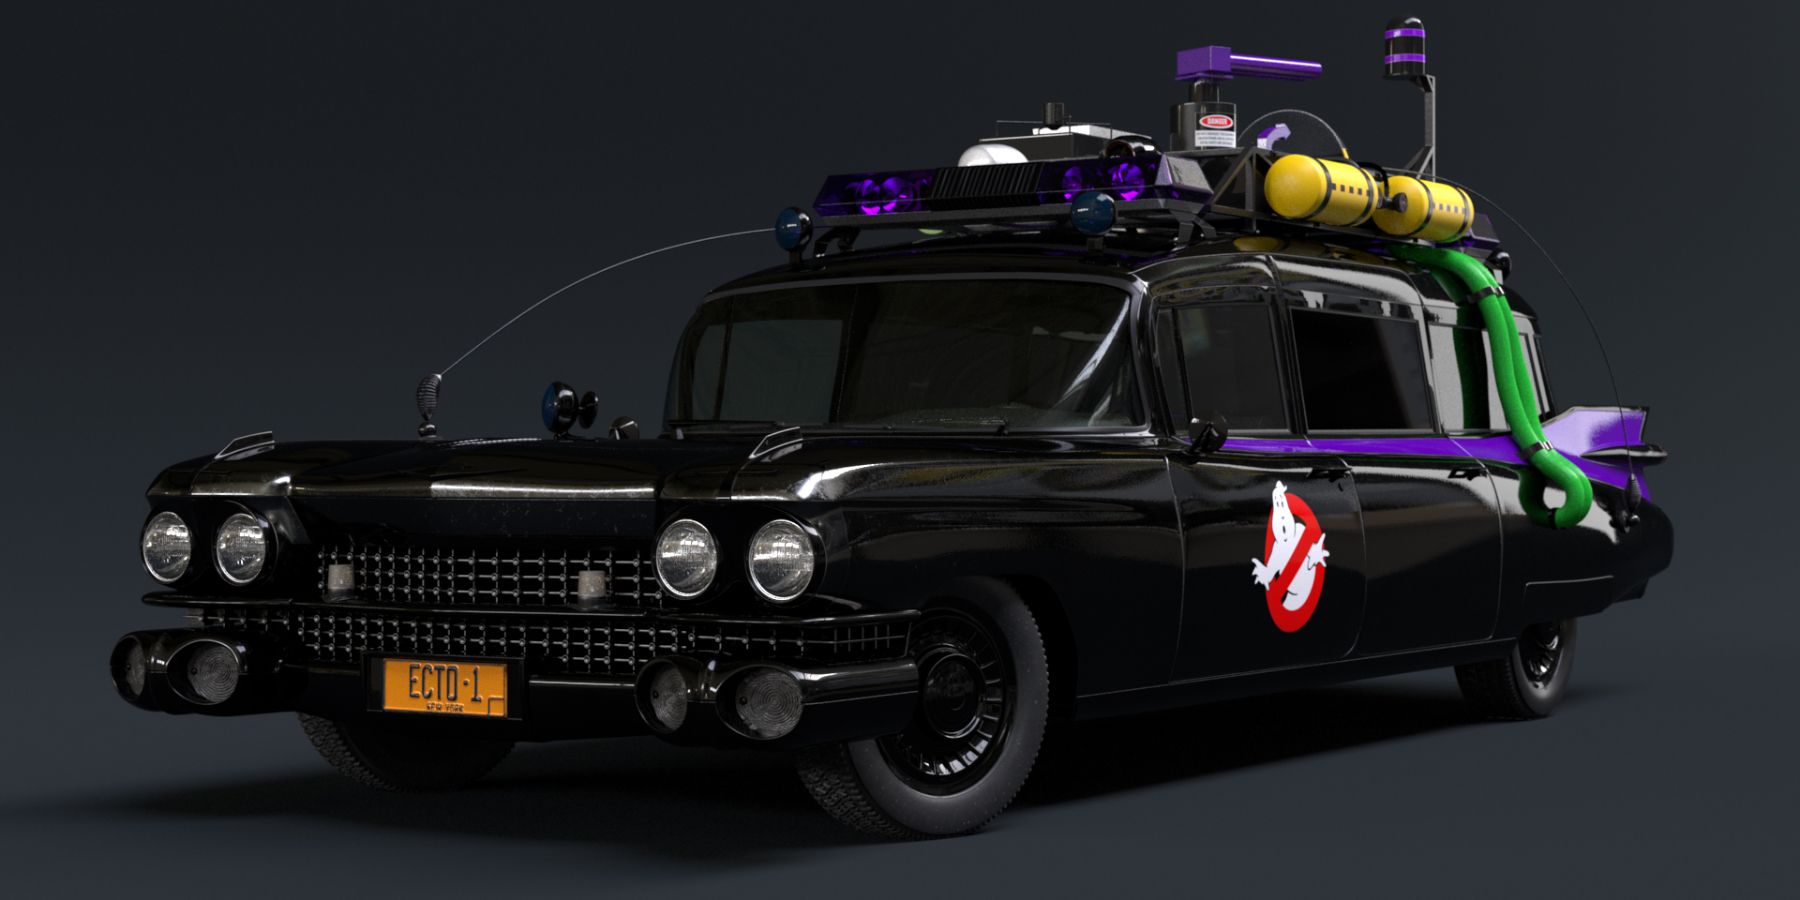 Concept render for the black variant of Ecto-1 in Ghostbusters 1984